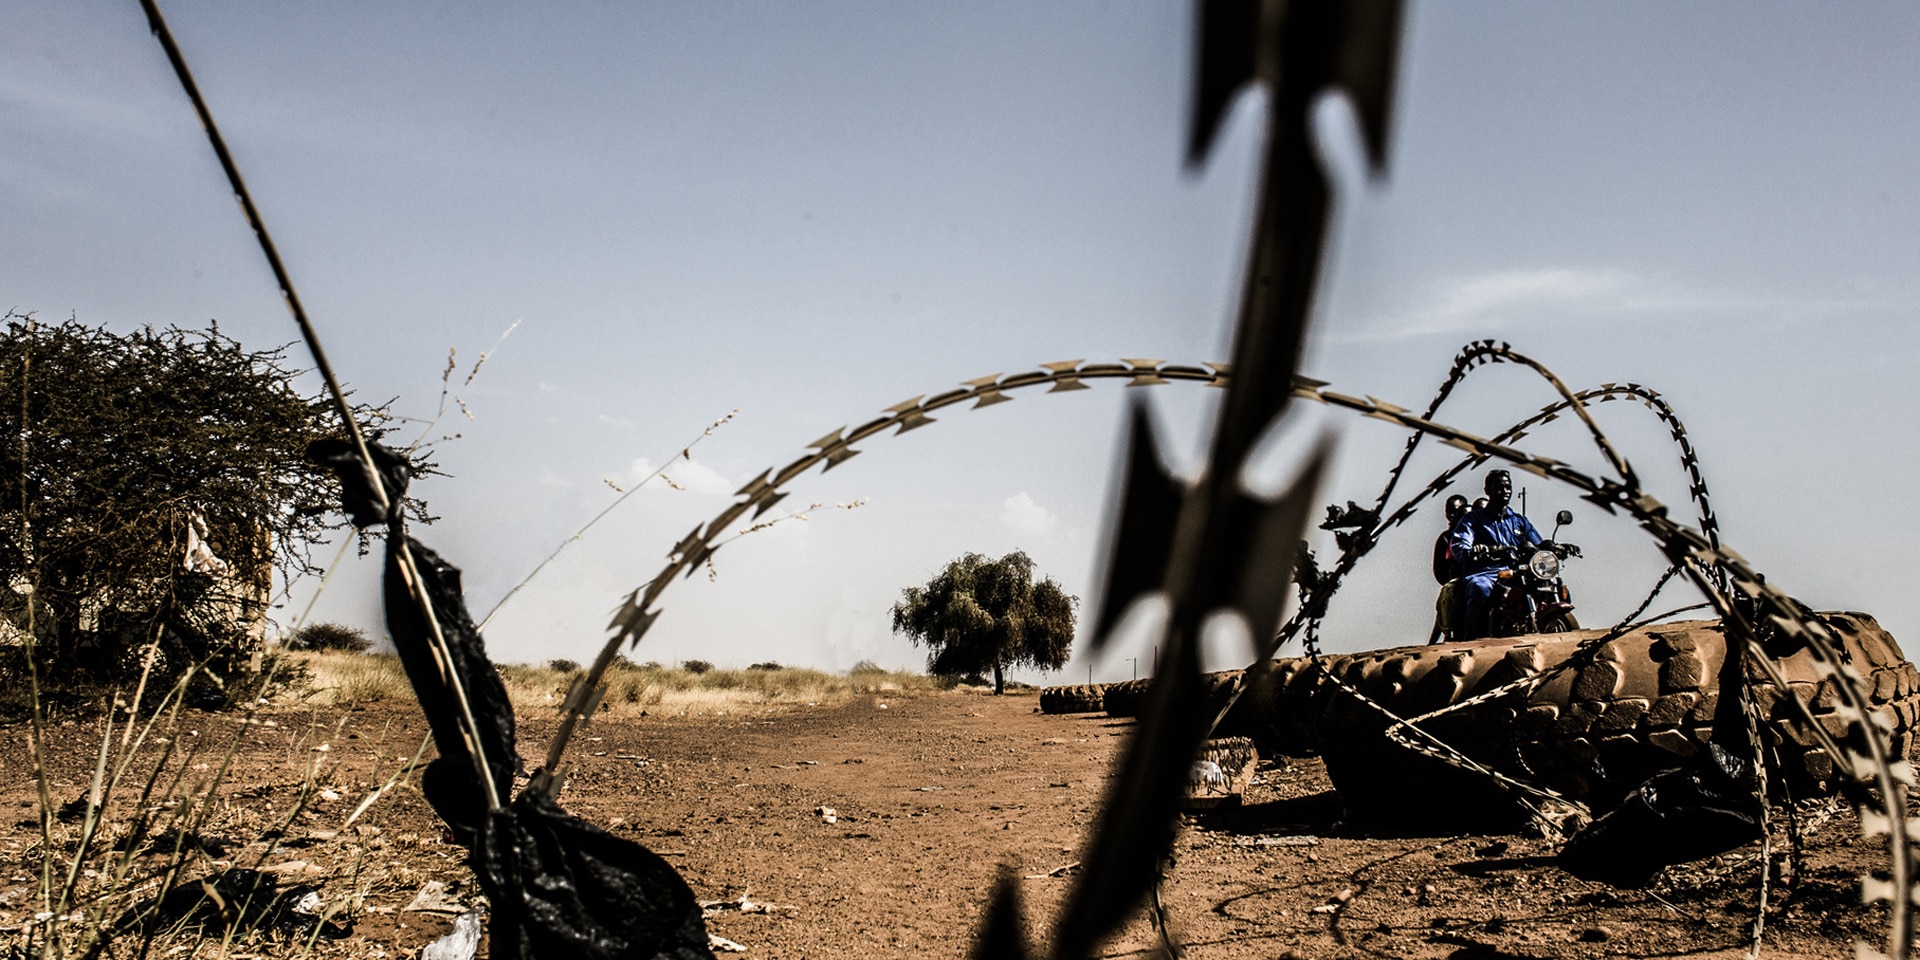 Barbed wire and tyres on a sandy road in Africa. In the background, a person rides a motorbike.